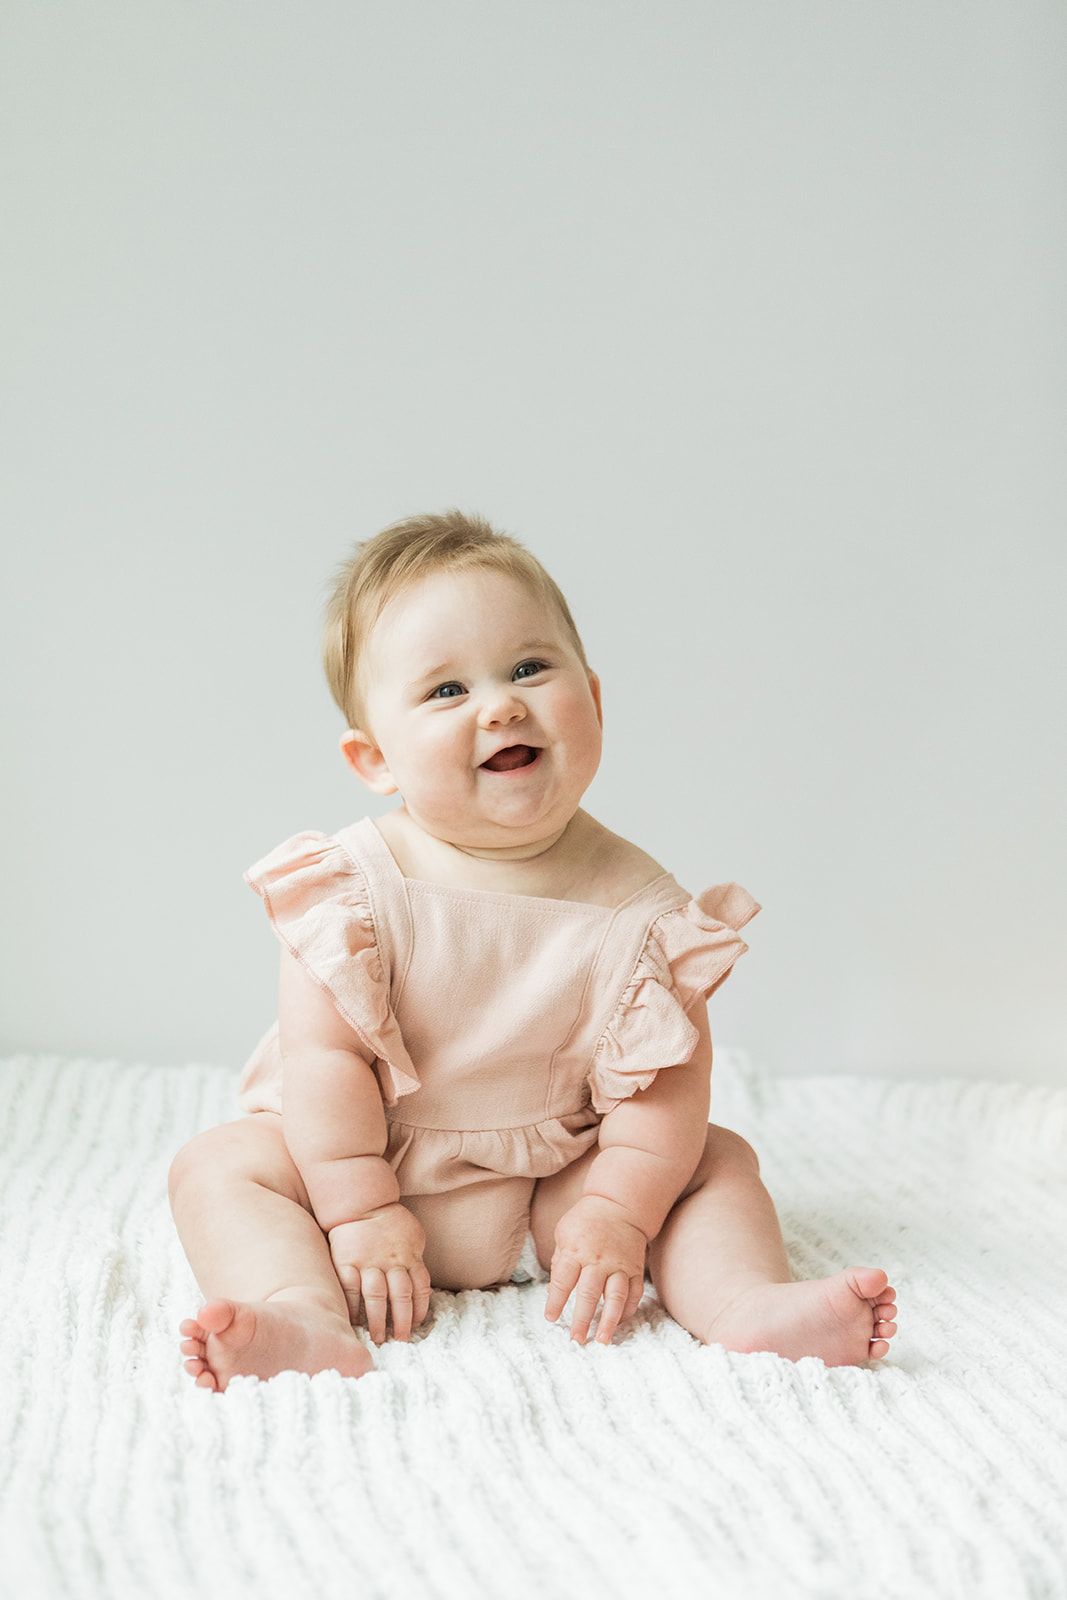 photo of 7 month old baby girl. she's sitting down and smiling big